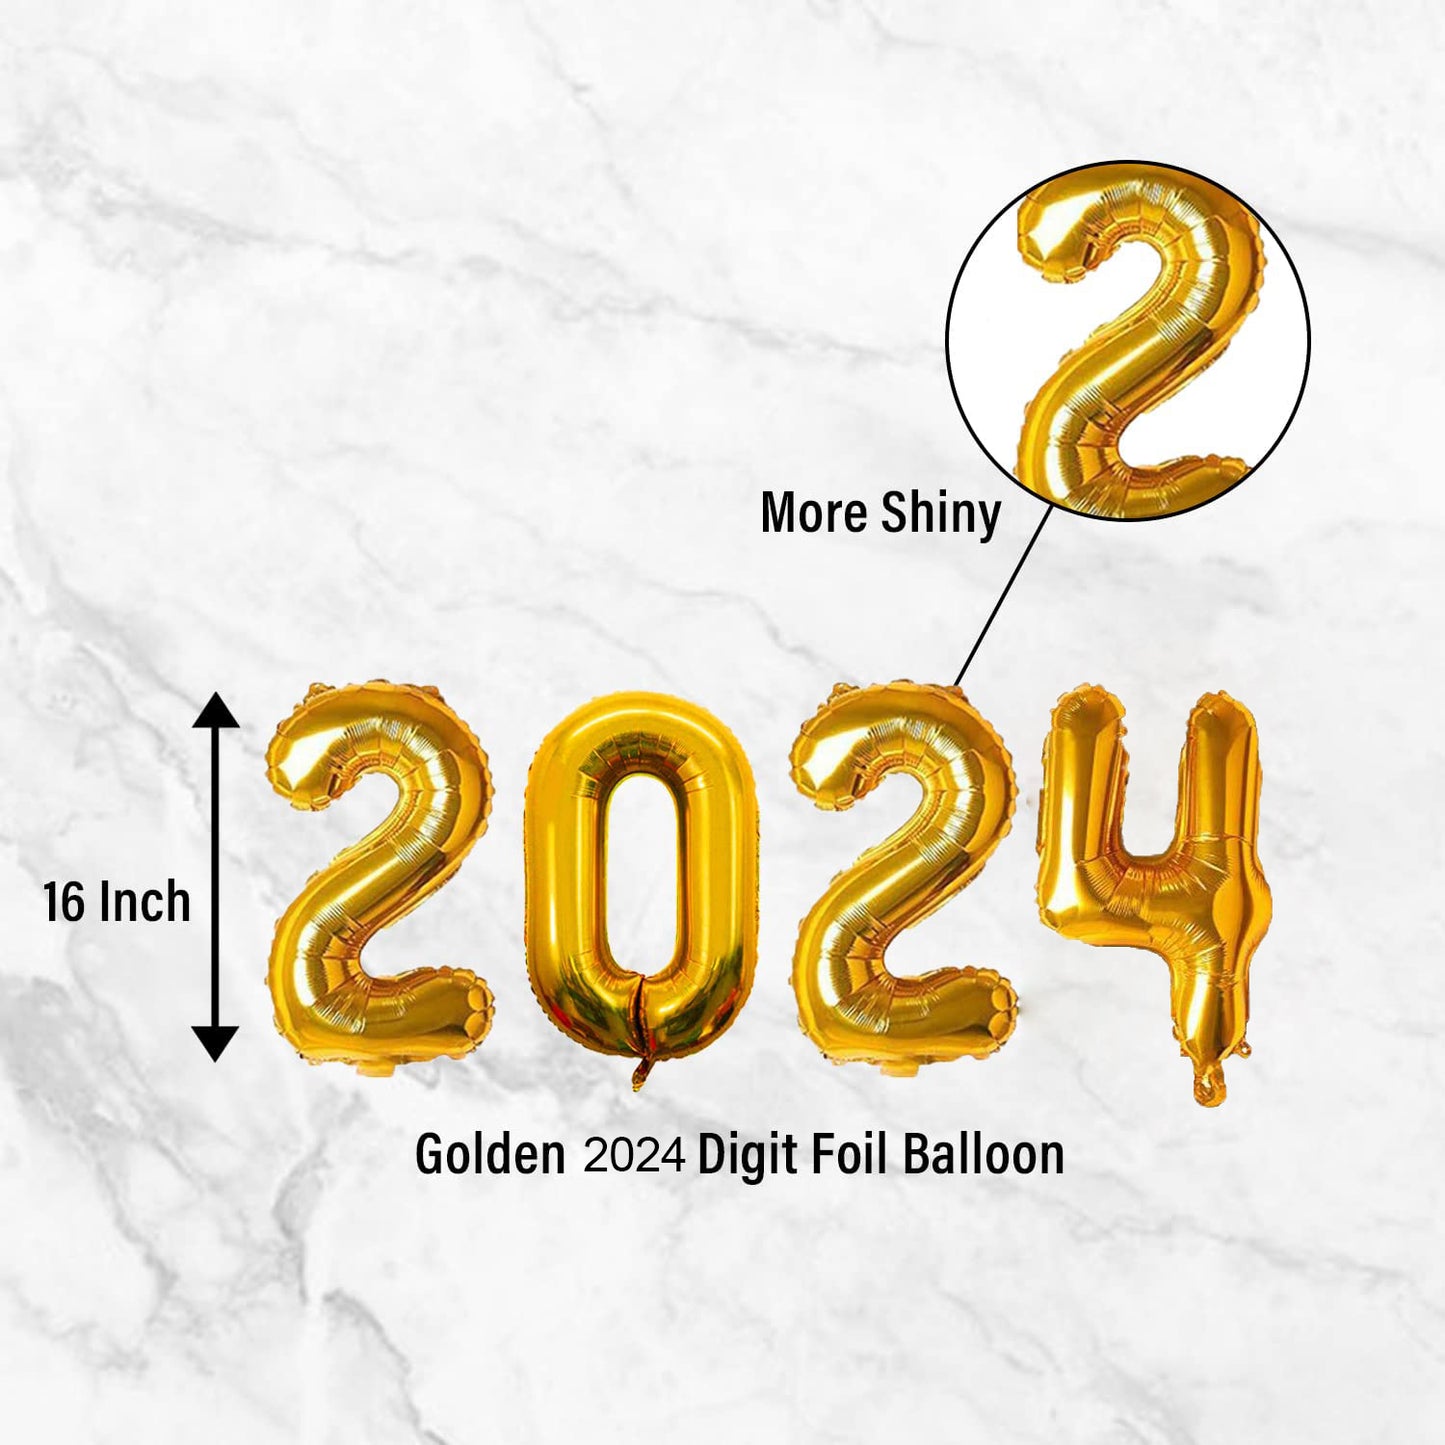 Black & Golden New Year Decoration Items - 30 Pcs Combo - Letter Foil, Star Shape Foil, Confetti, Metallic & Latex Balloons for Home Deocration Party